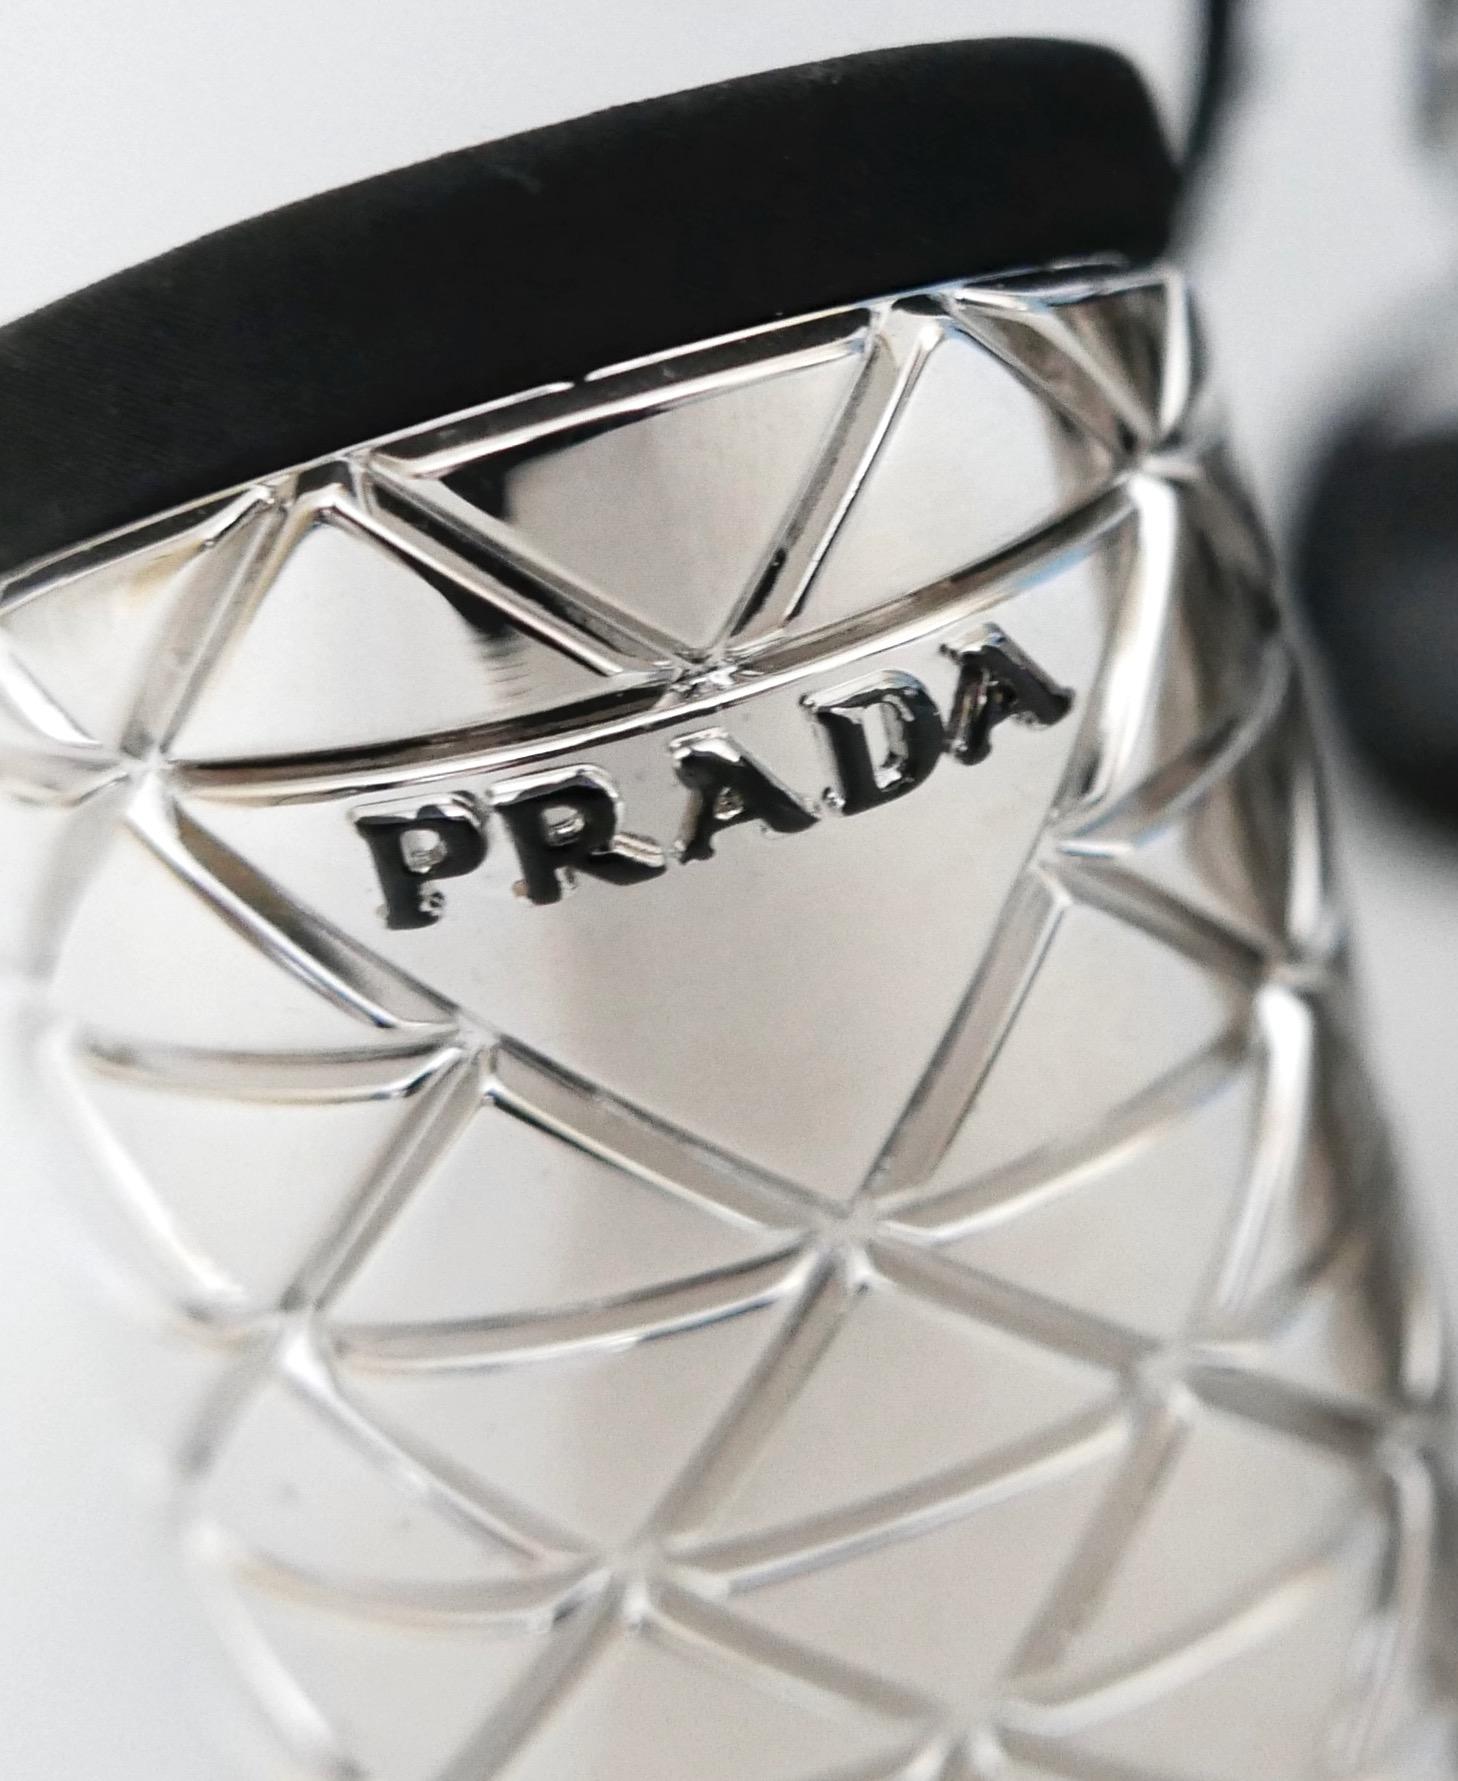 Prada Crystal Disco Ball Heel Sandals In New Condition For Sale In London, GB